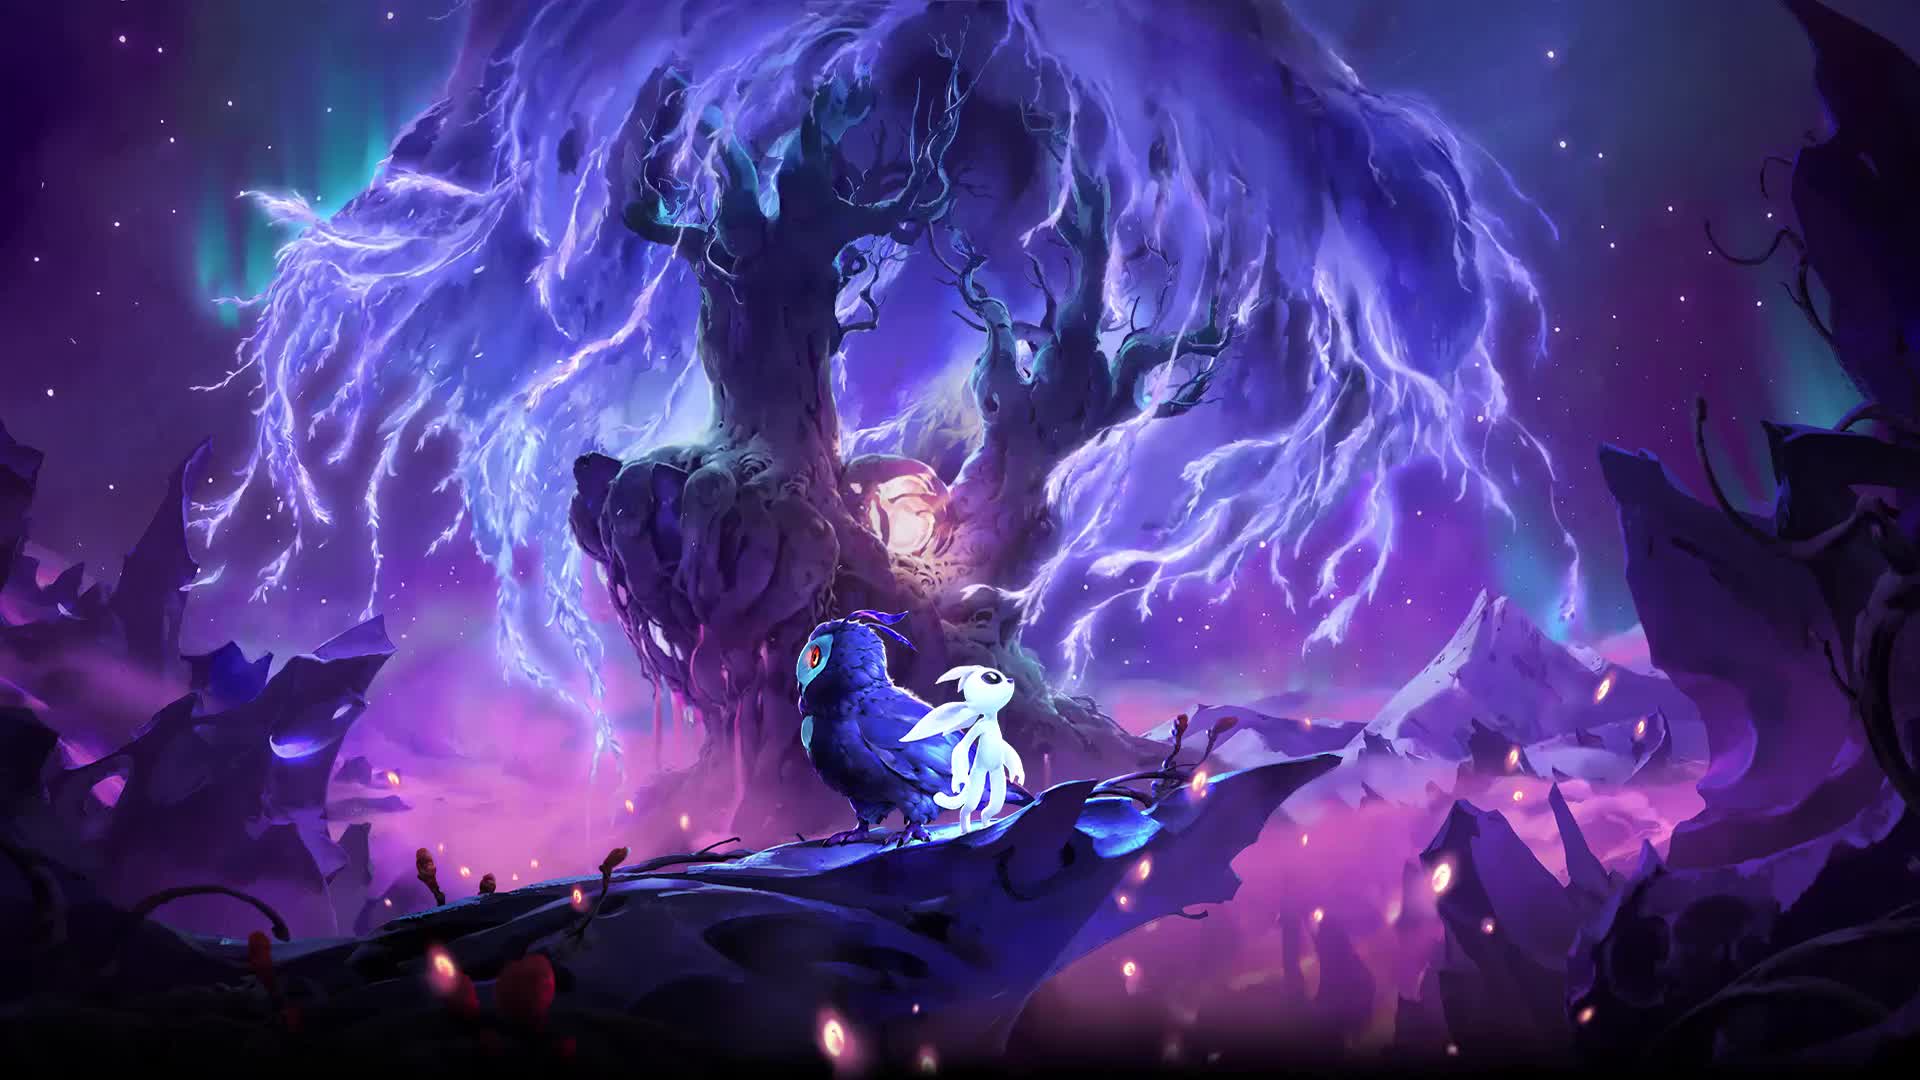 Ori And The Will of The Wisps Live Wallpaper   DesktopHut